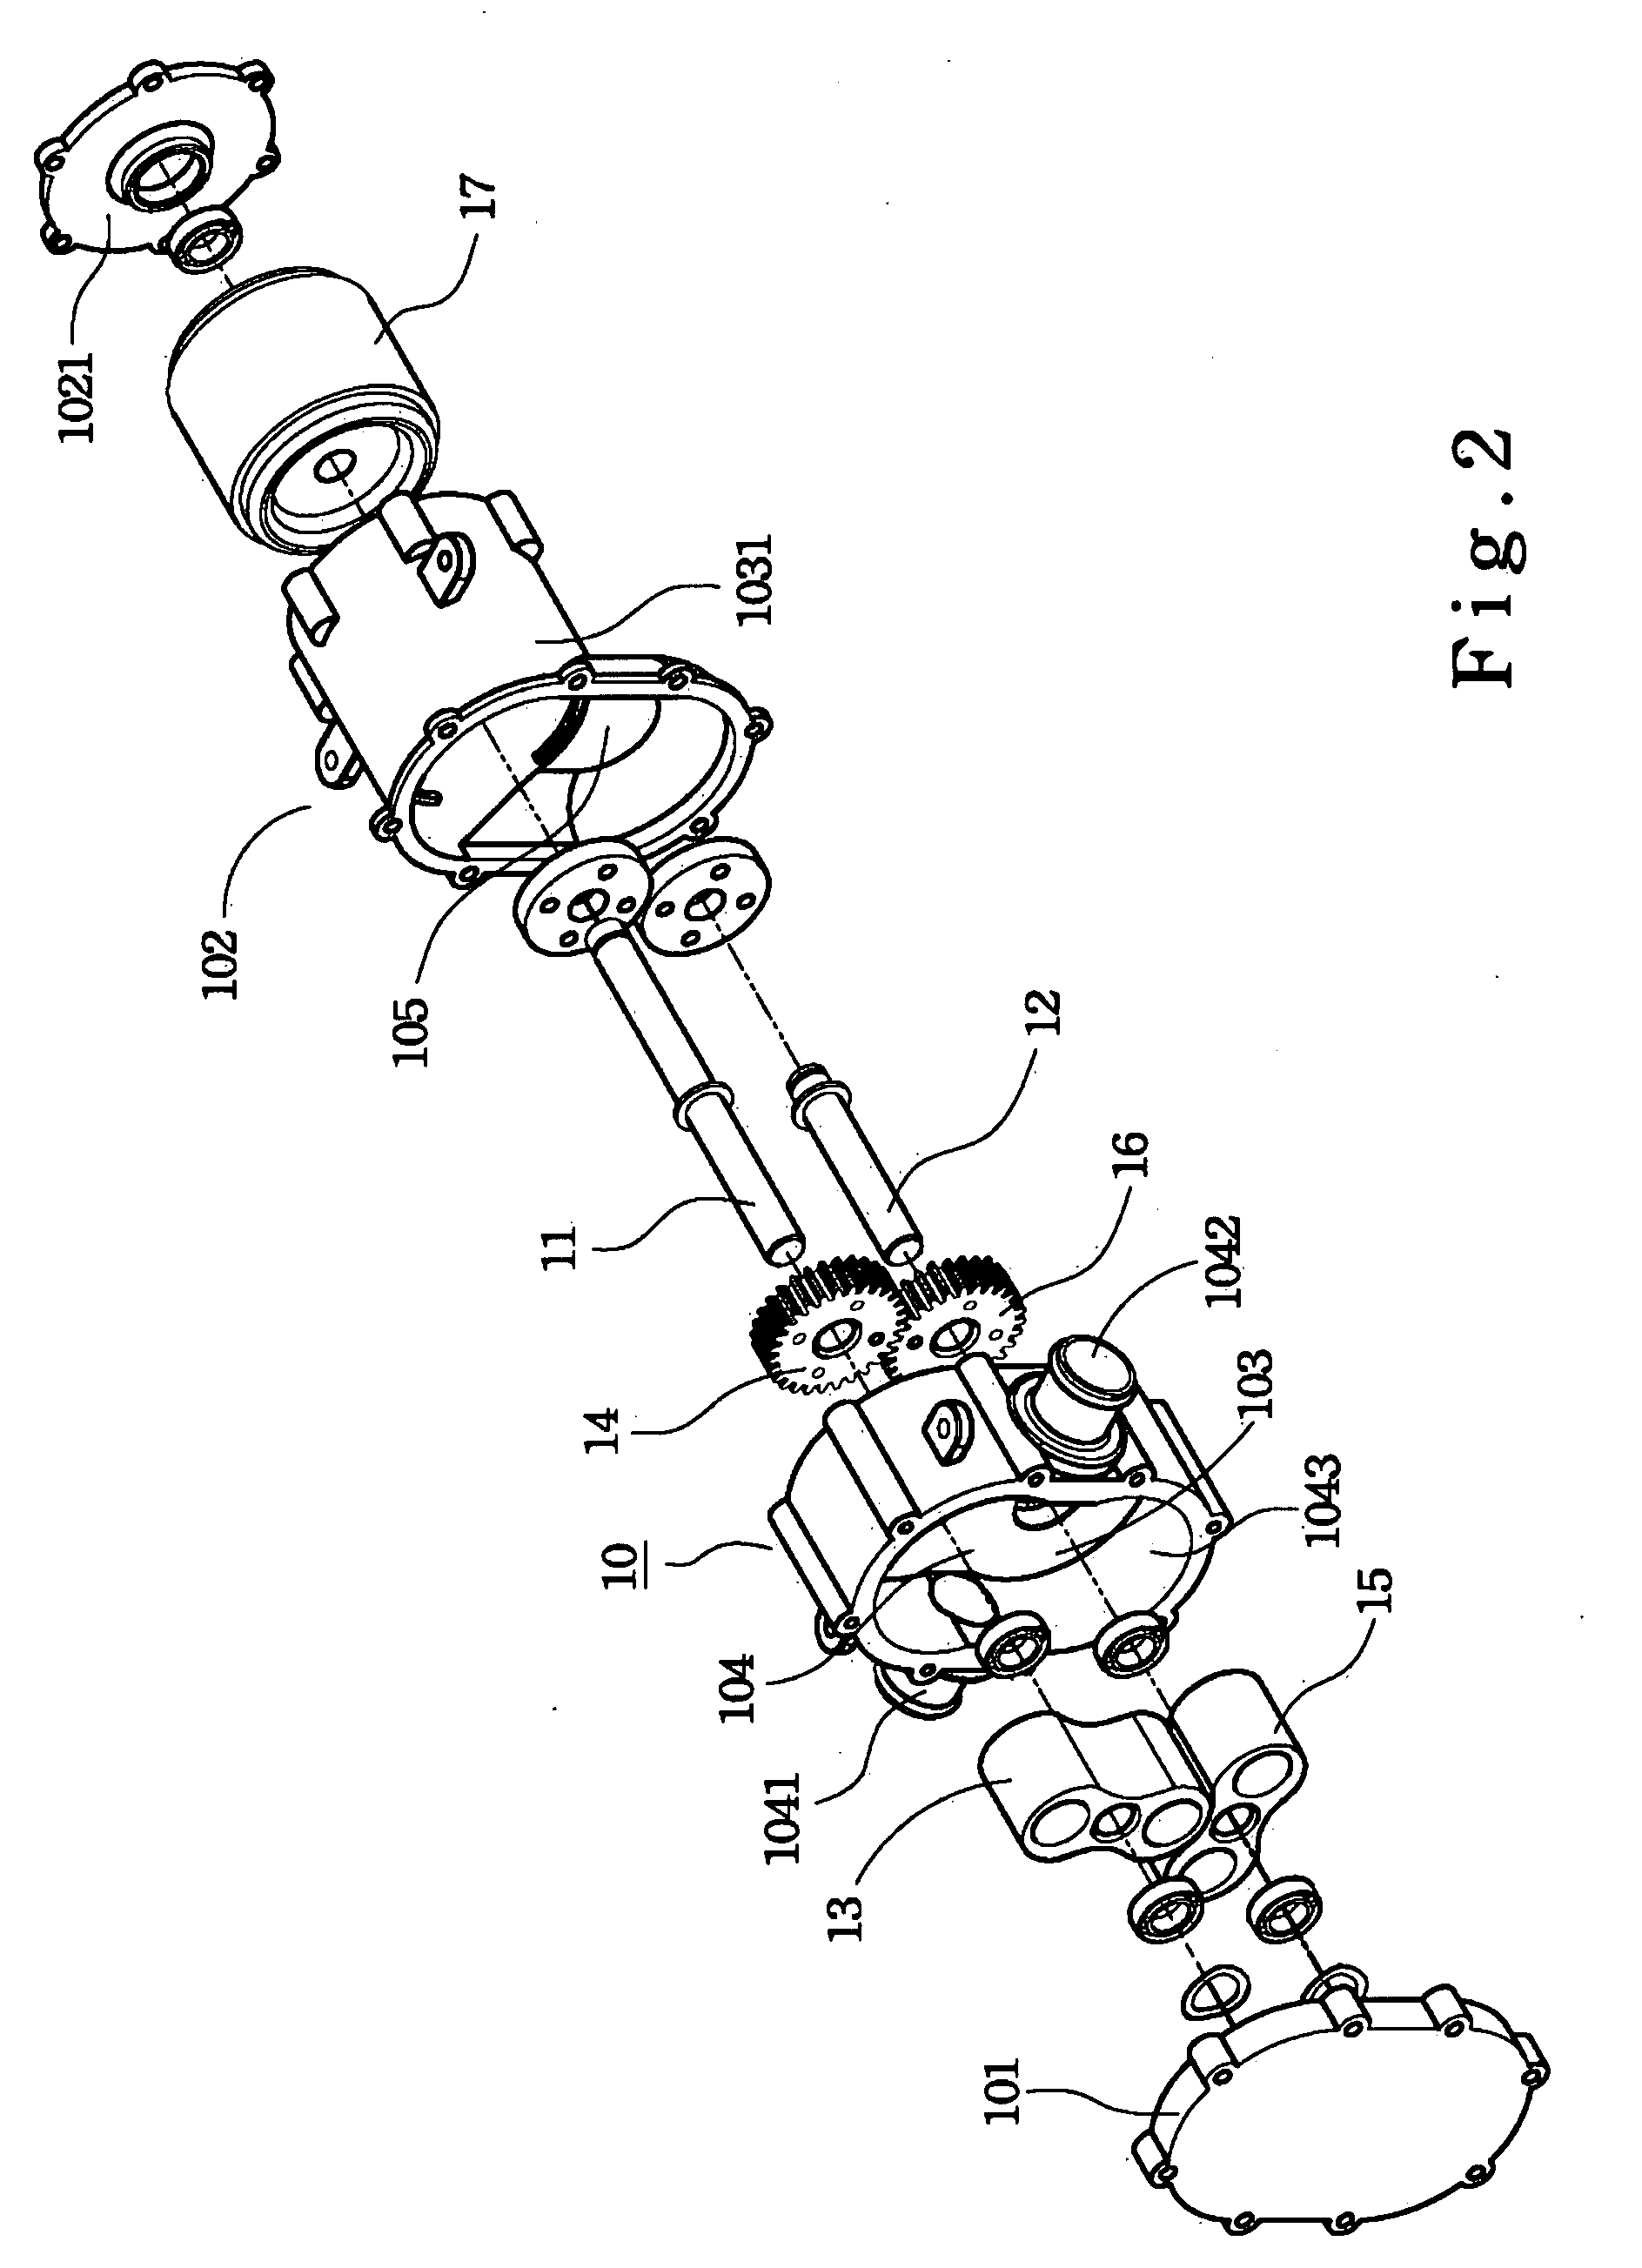 Motor direct drive air pump and related applications thereof